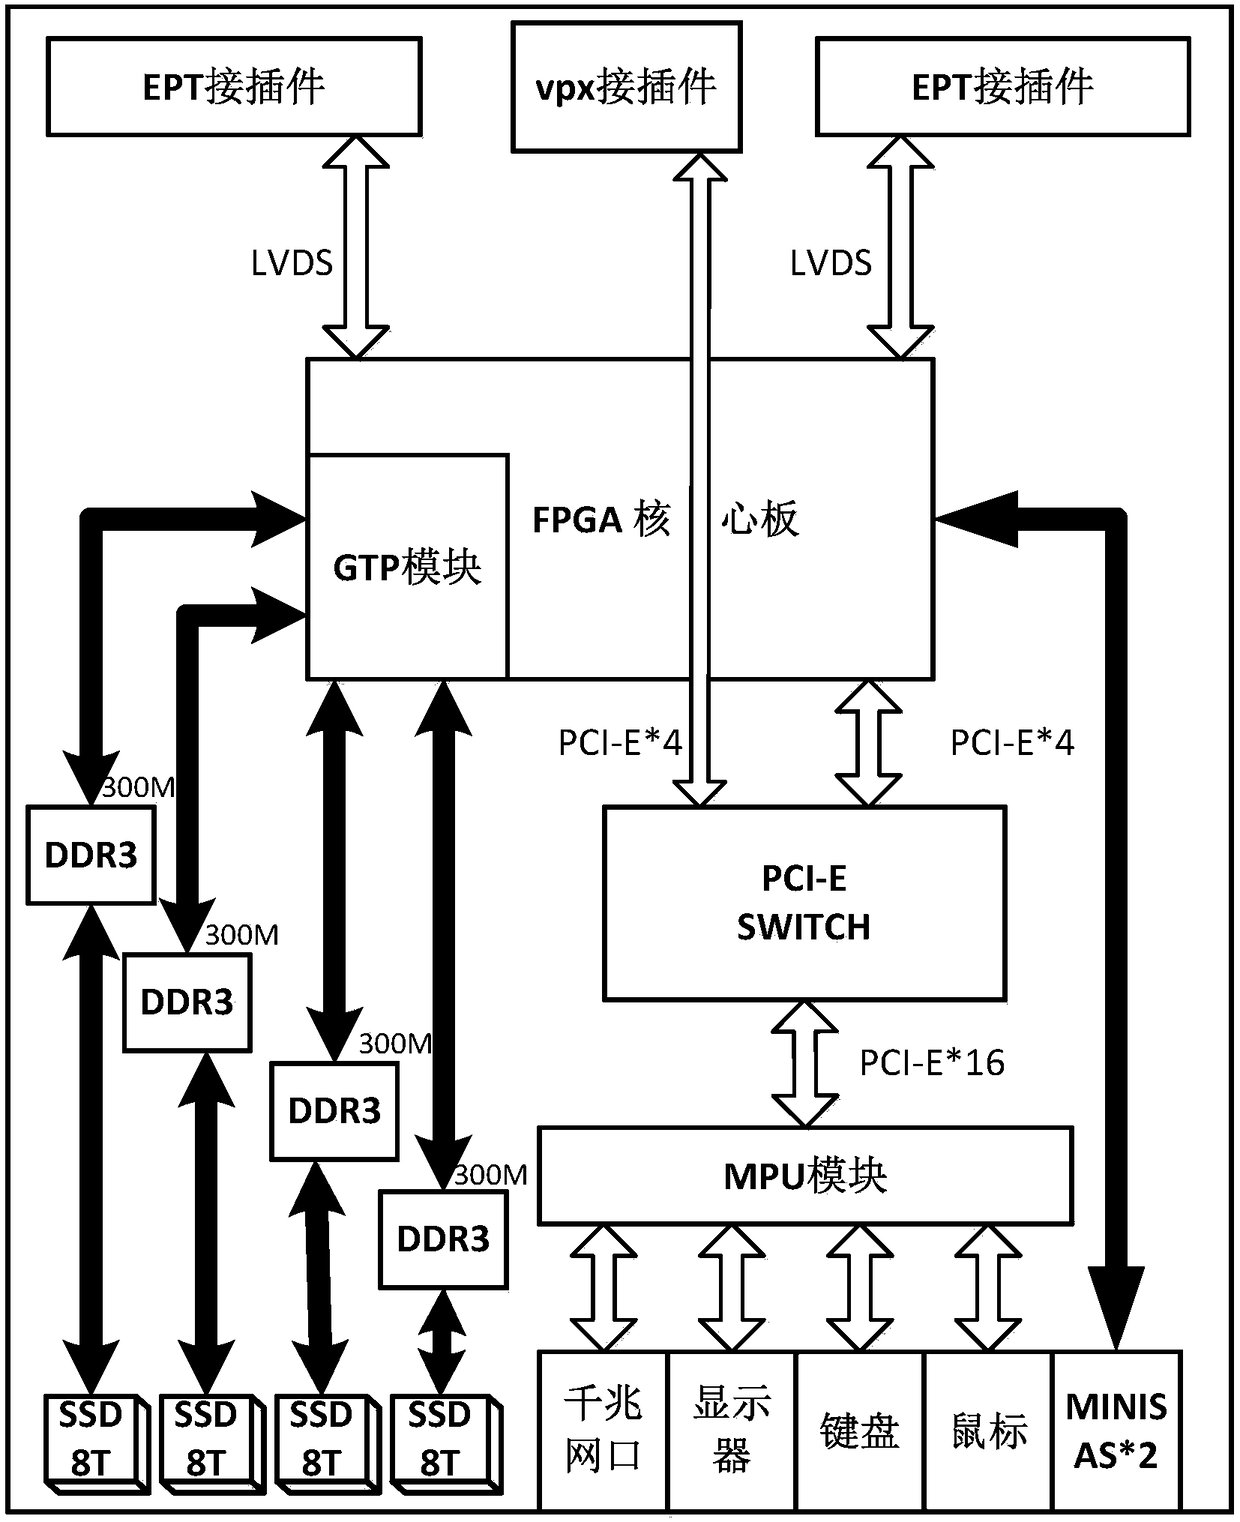 A High-speed Data Acquisition and Storage System Based on FPGA